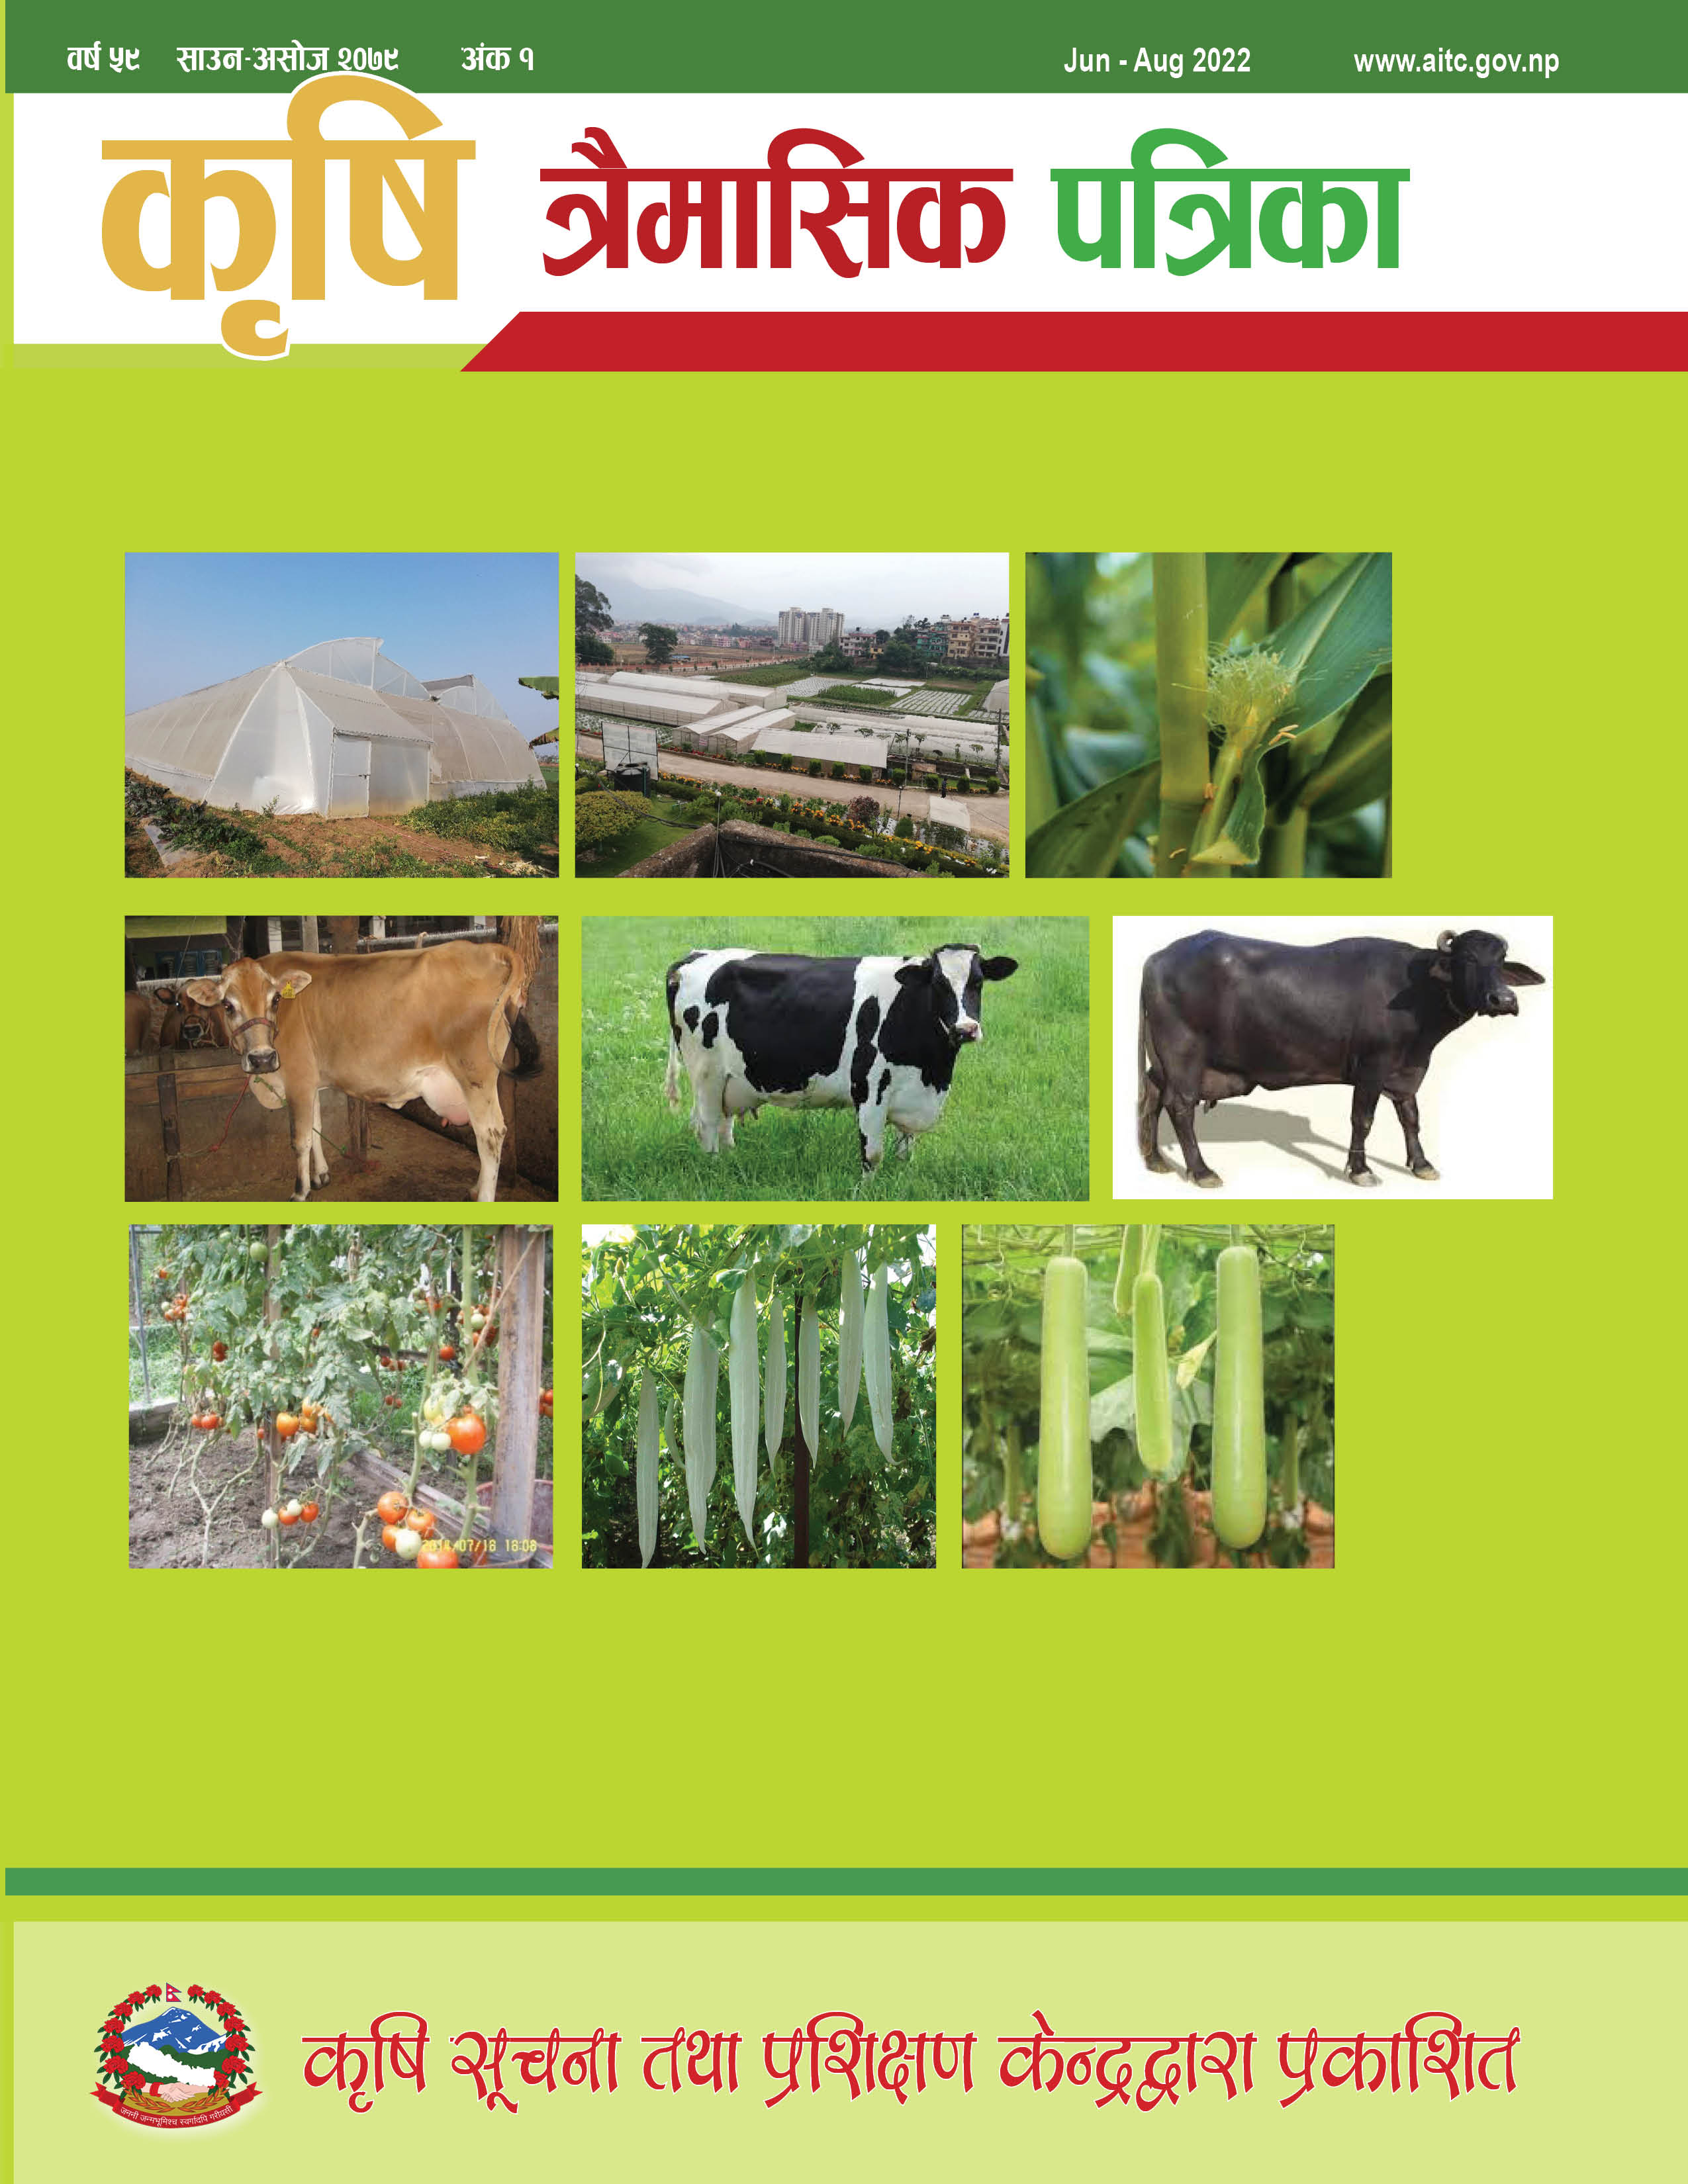 Cover image of Agricultural Quarterly, 2079 (July-August) issue 1